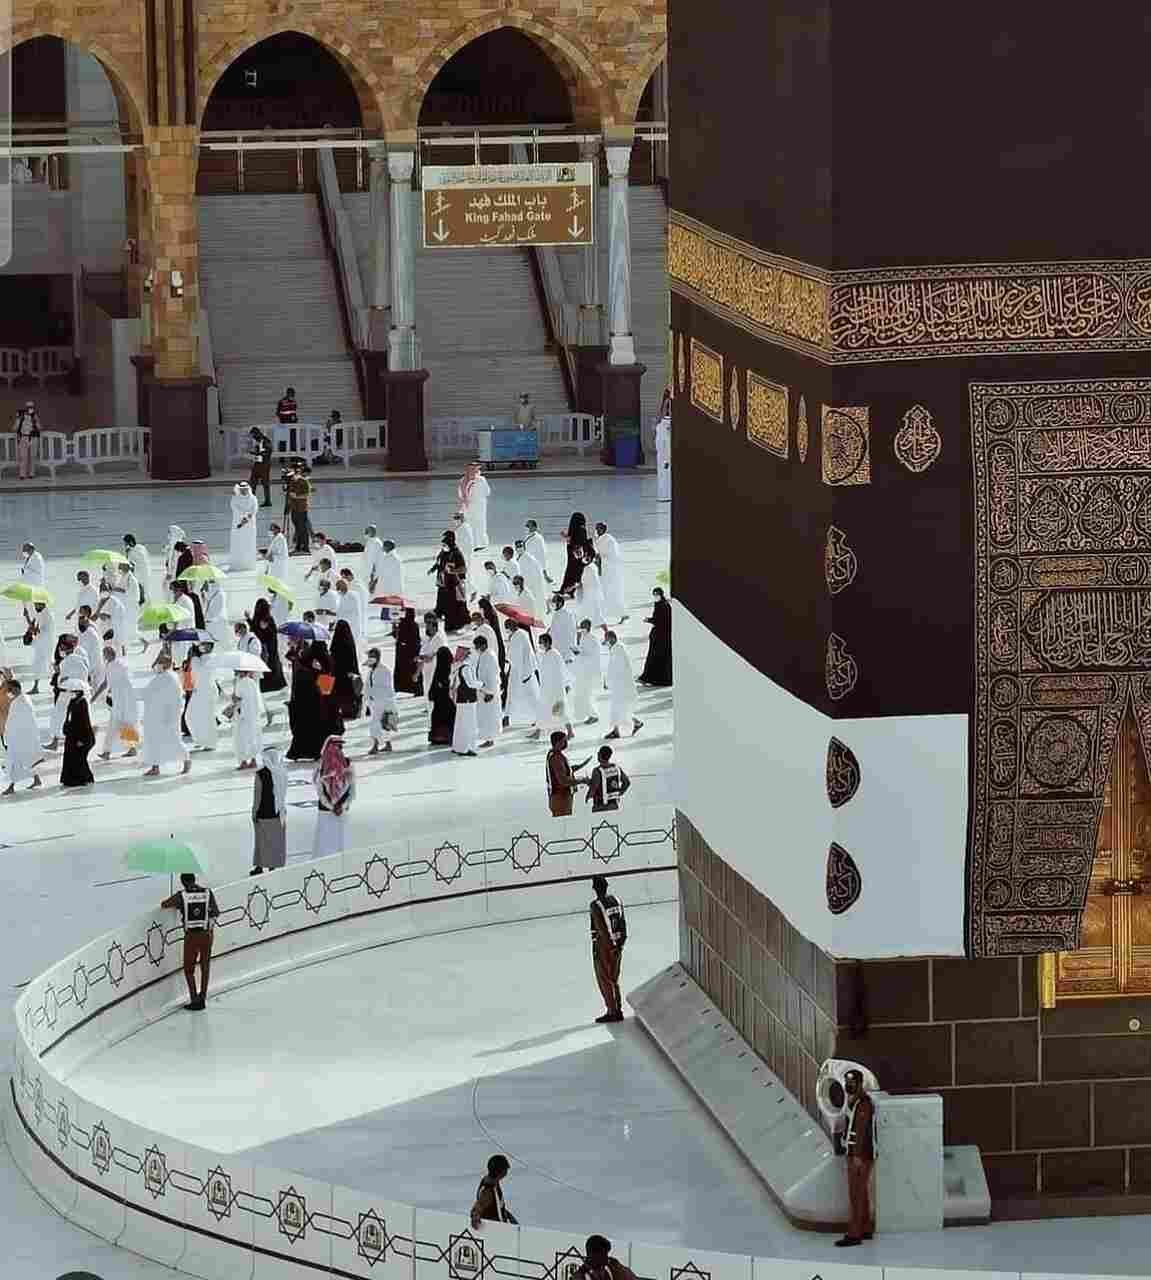 The Kaaba: History and Significance in Islam